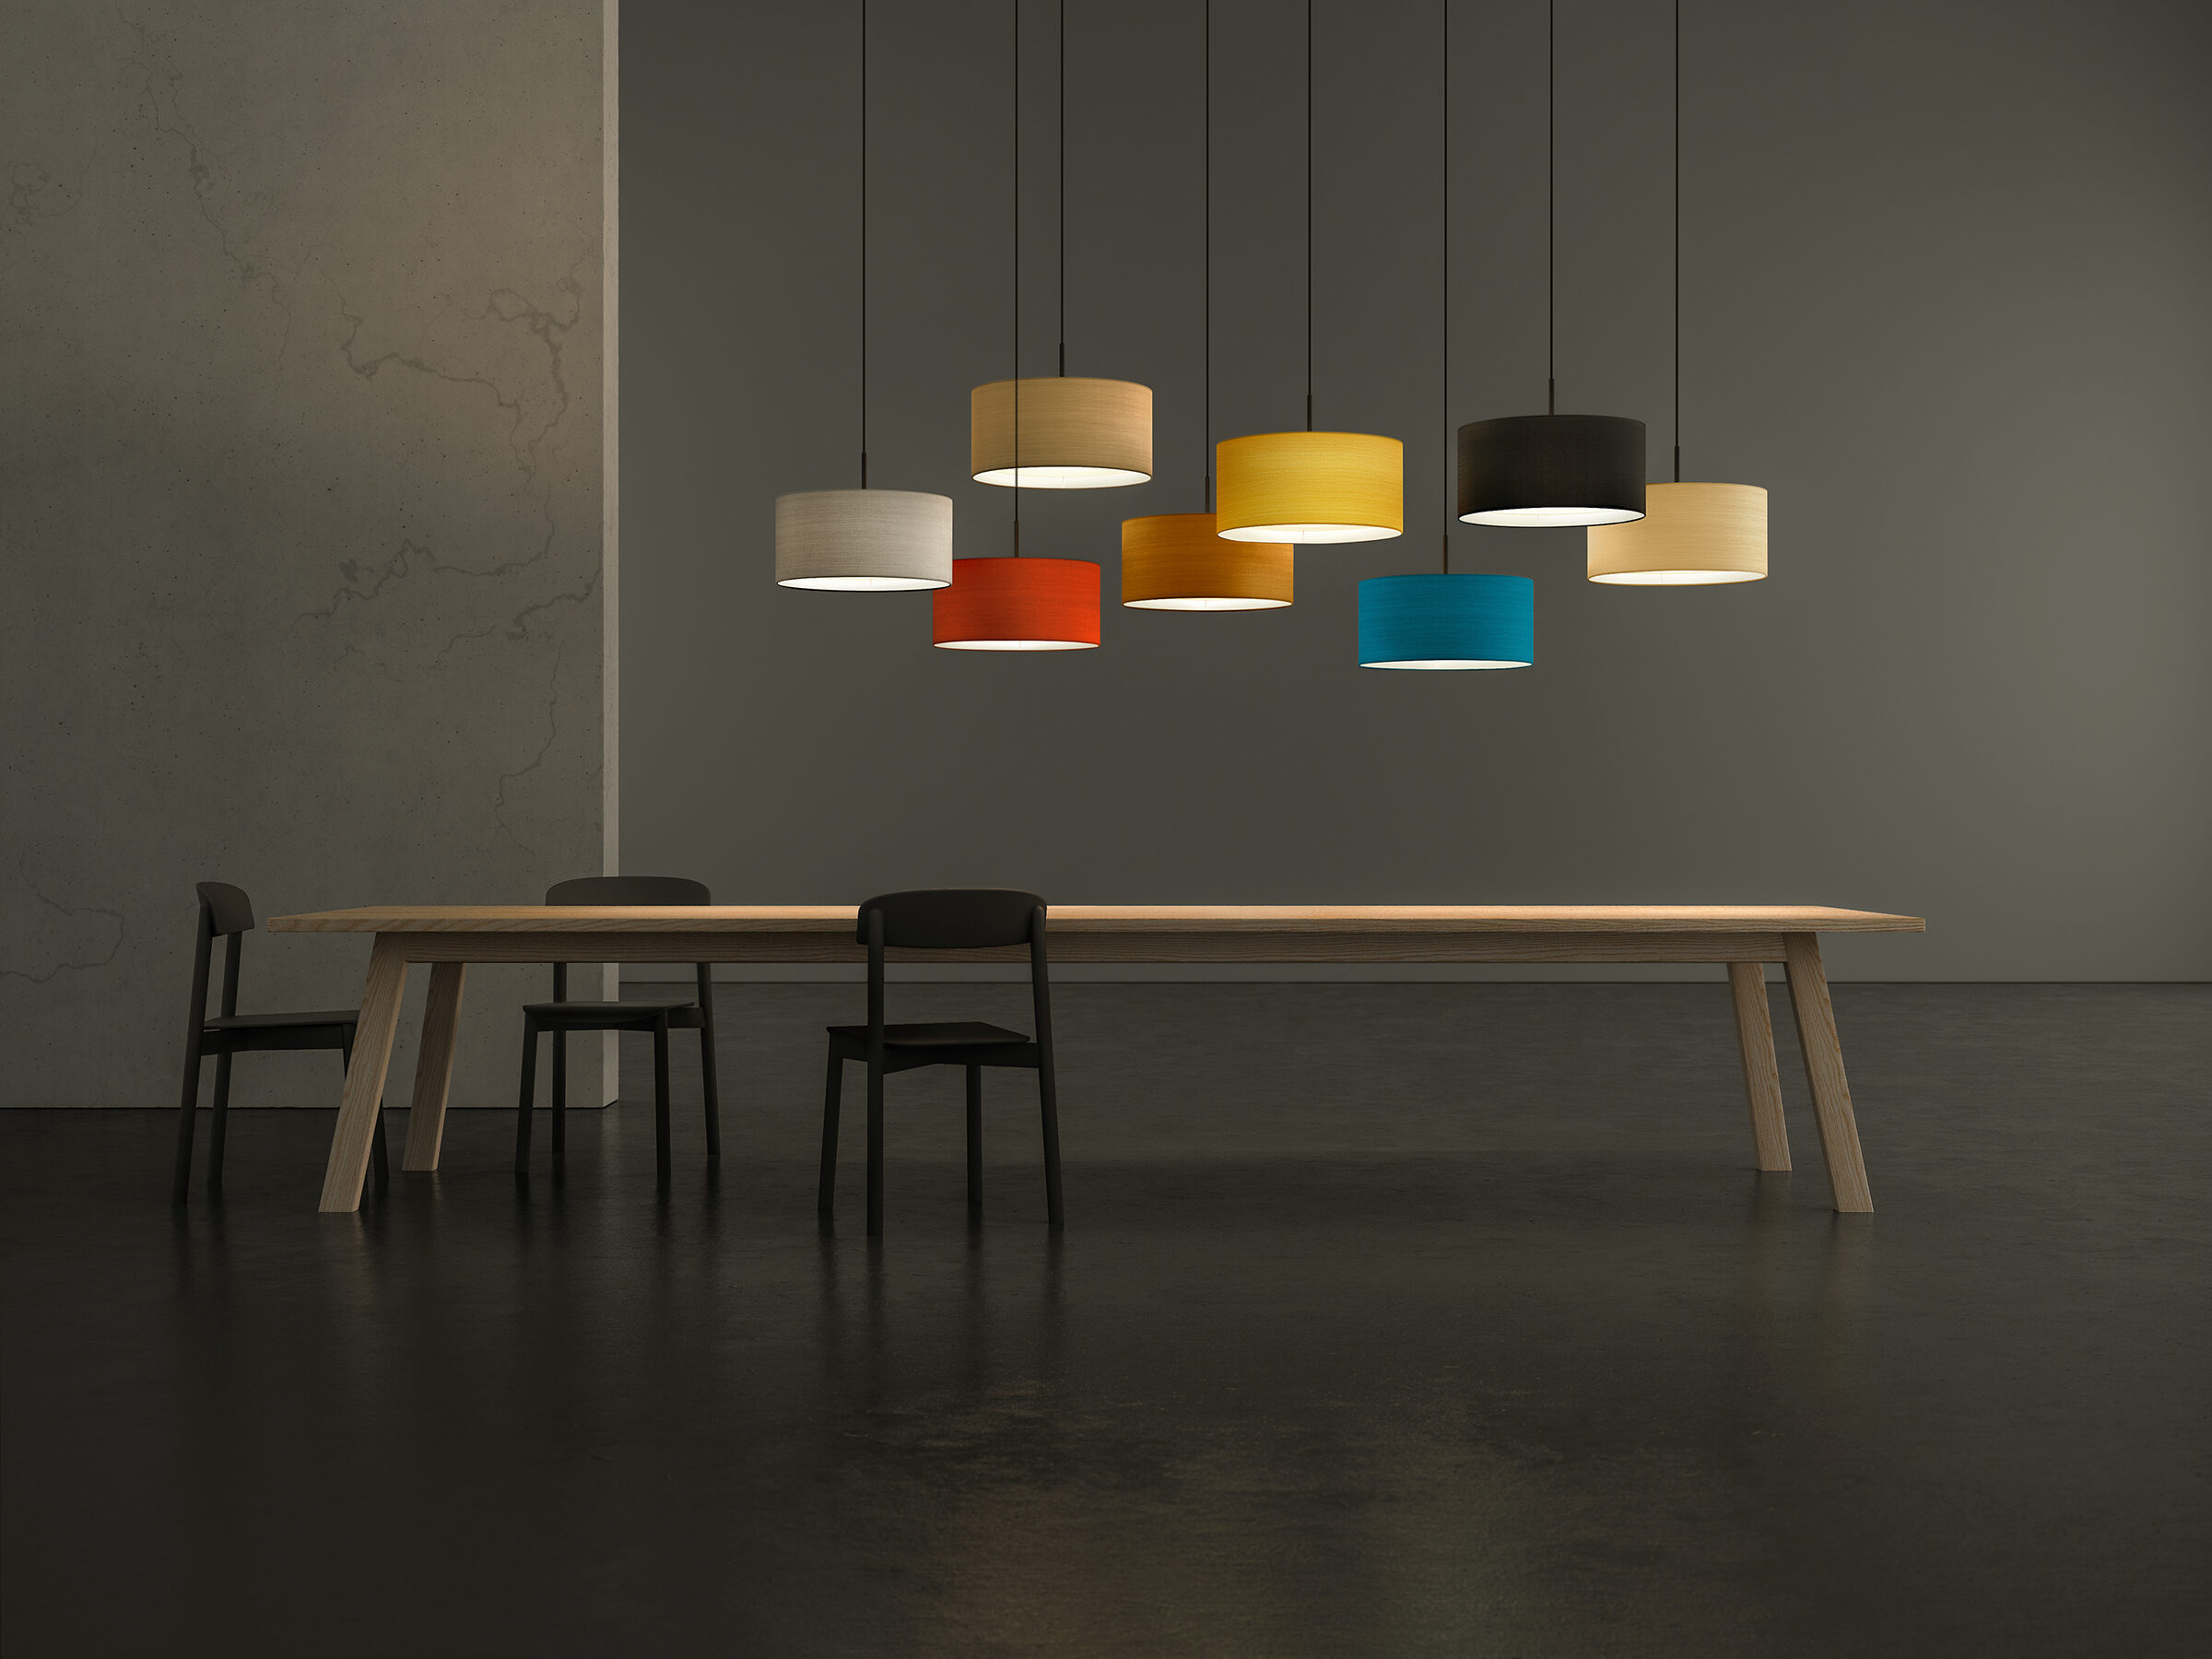 A set of CYLS DRUM pendant lamps in different colours above a large solid wooden table.